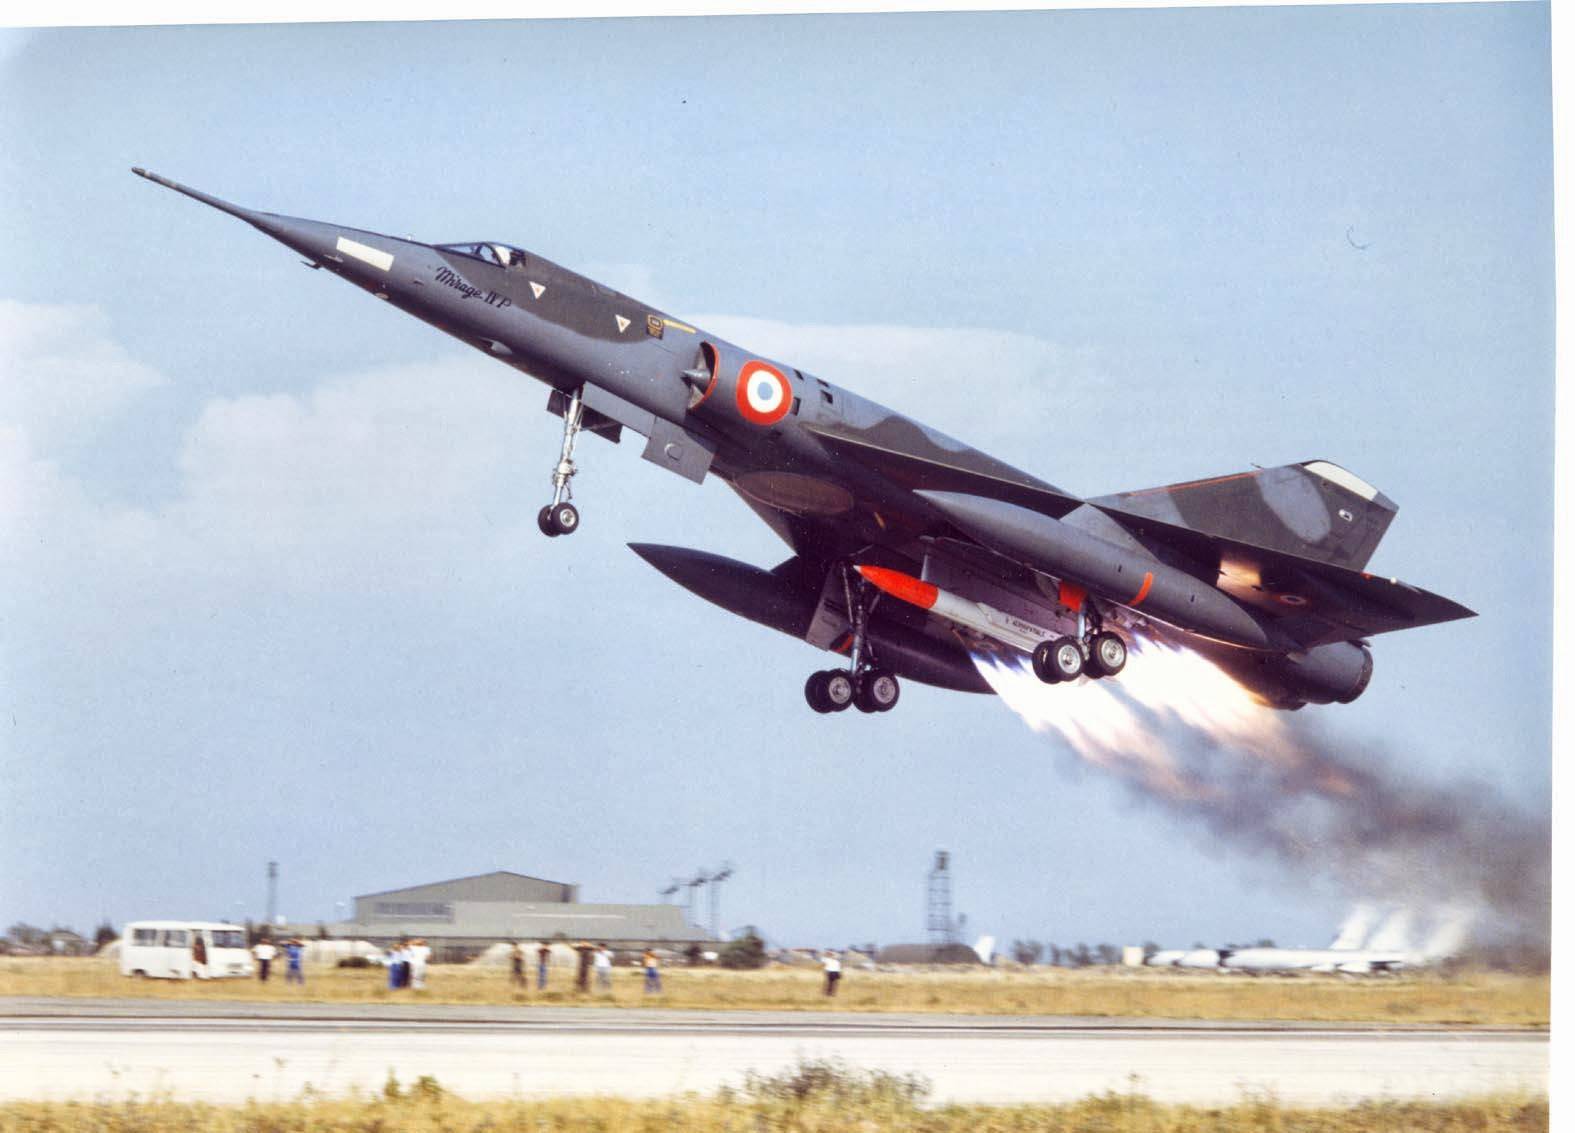 Mirage IV taking off with rocket booster, mounted with 1 ASMP